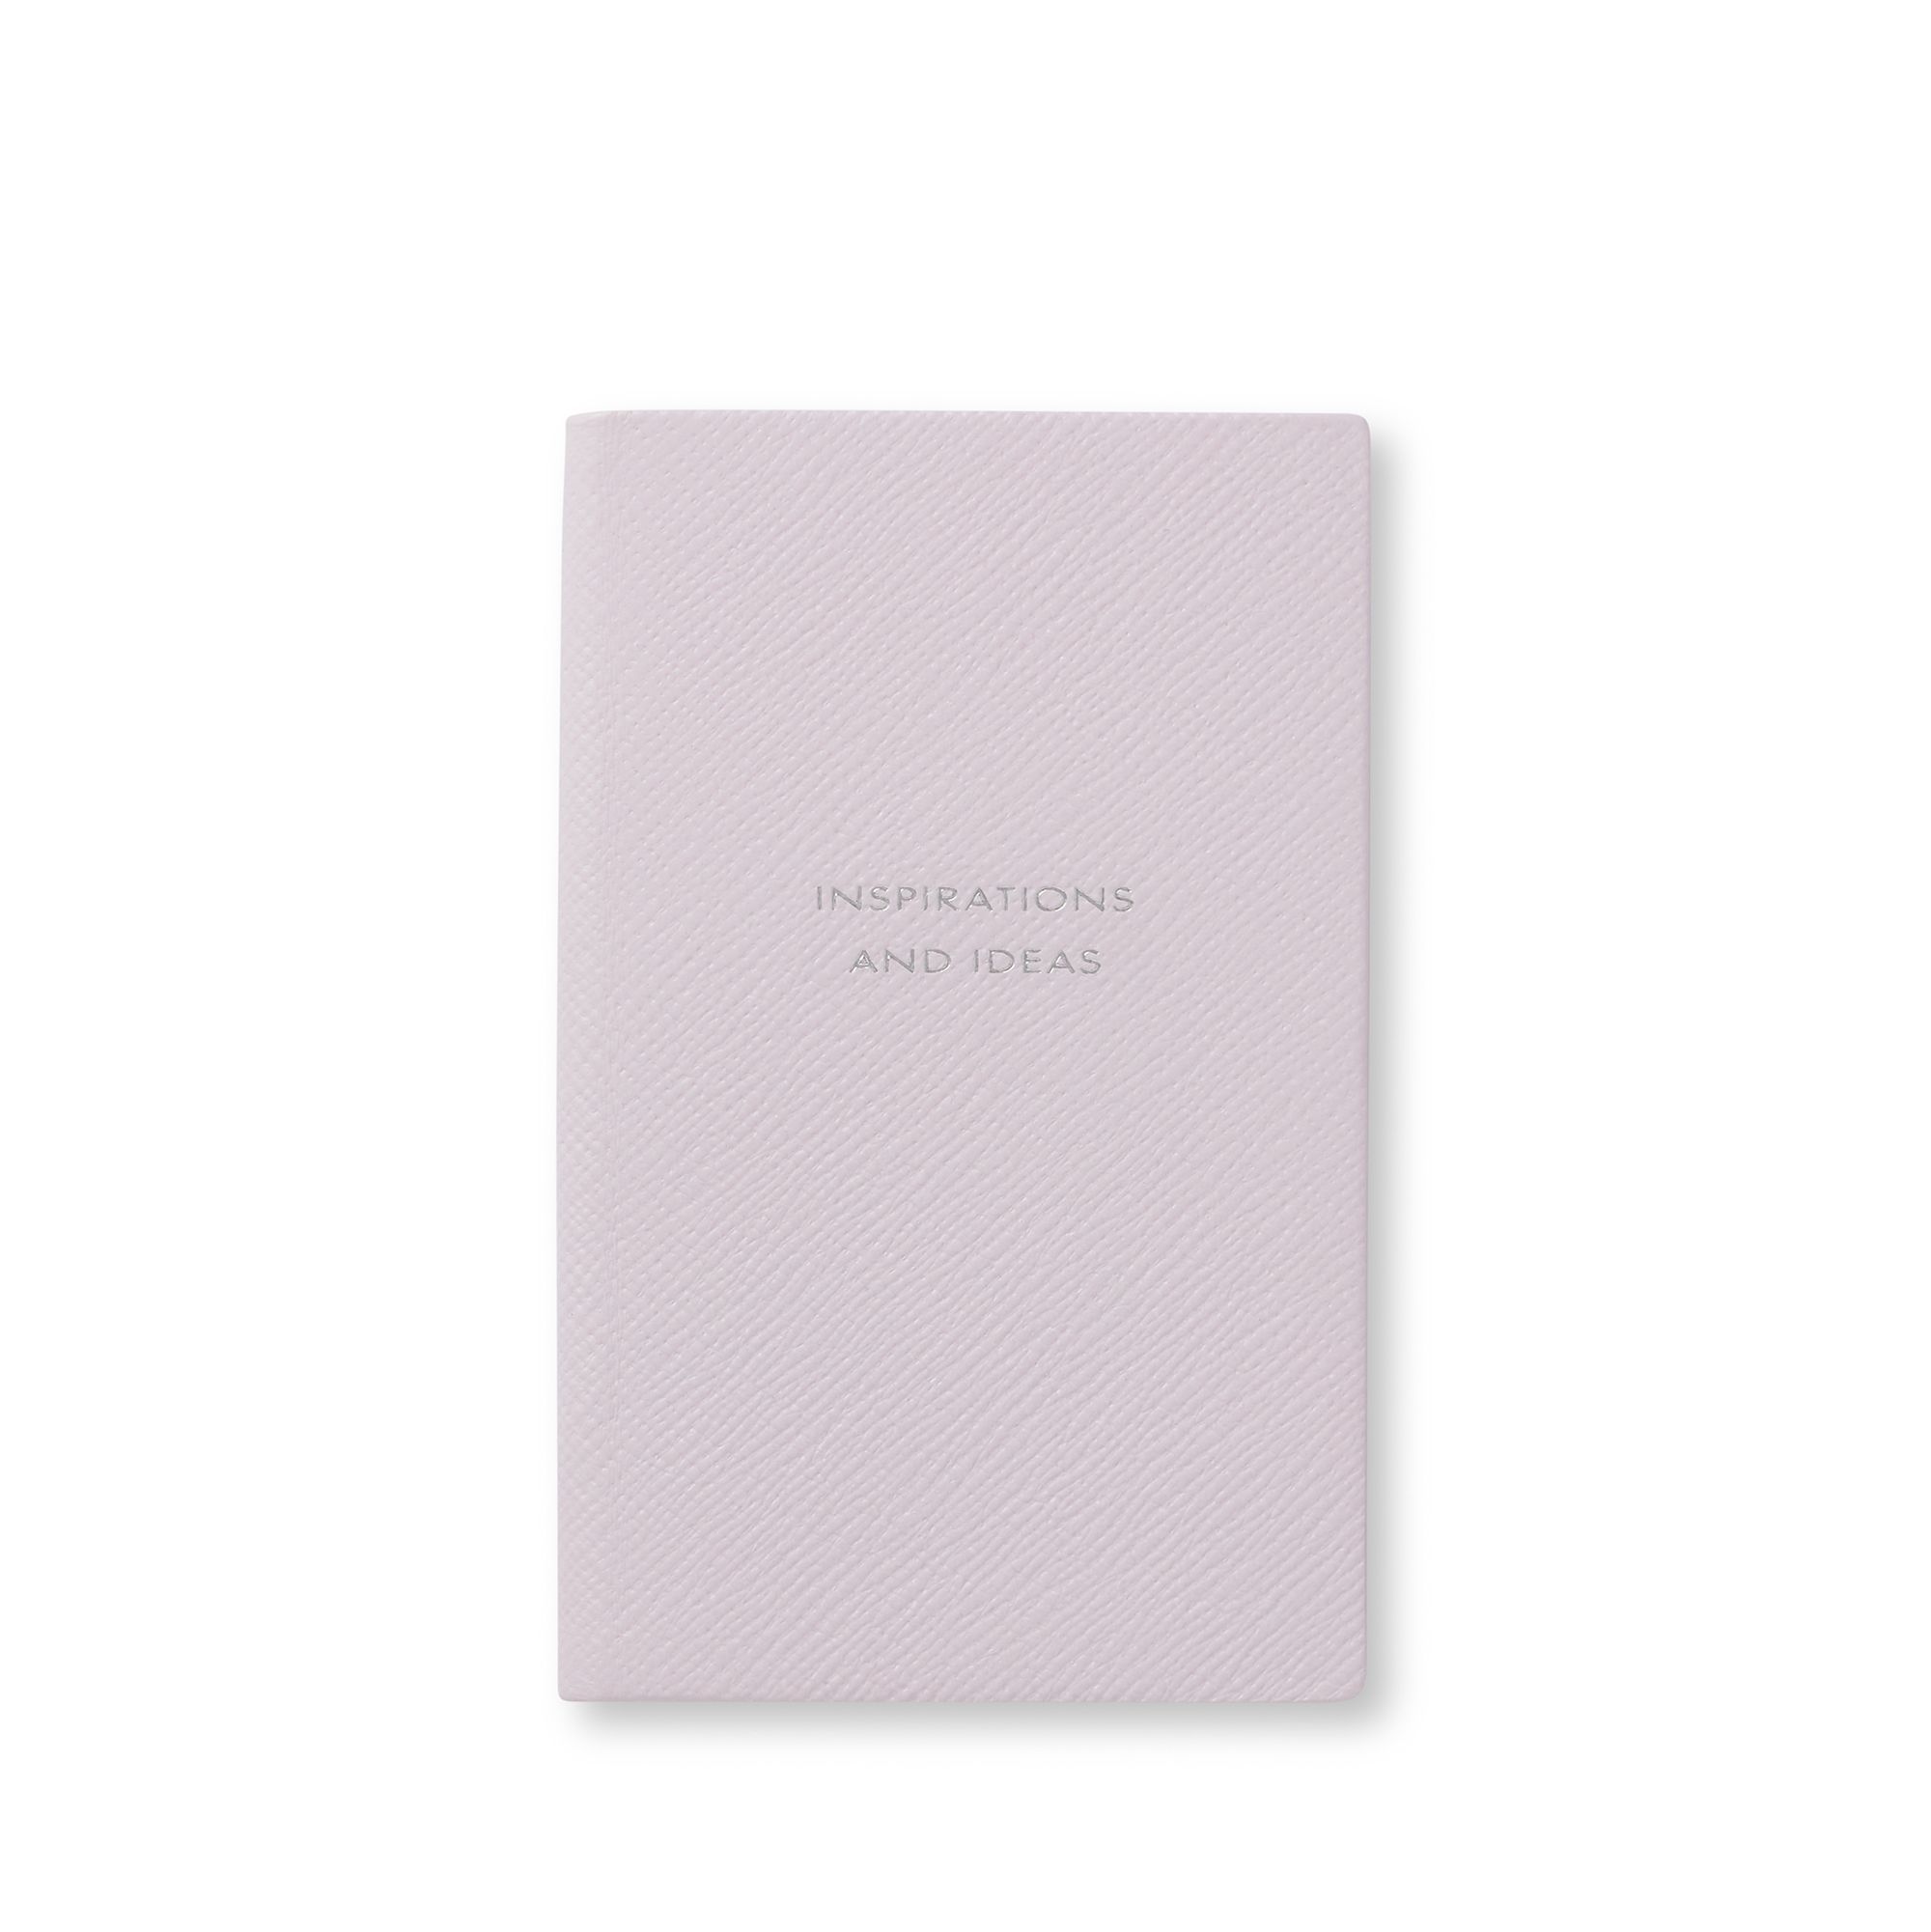 Inspirations and Ideas Panama Notebook in wisteria | Smythson | Smythson